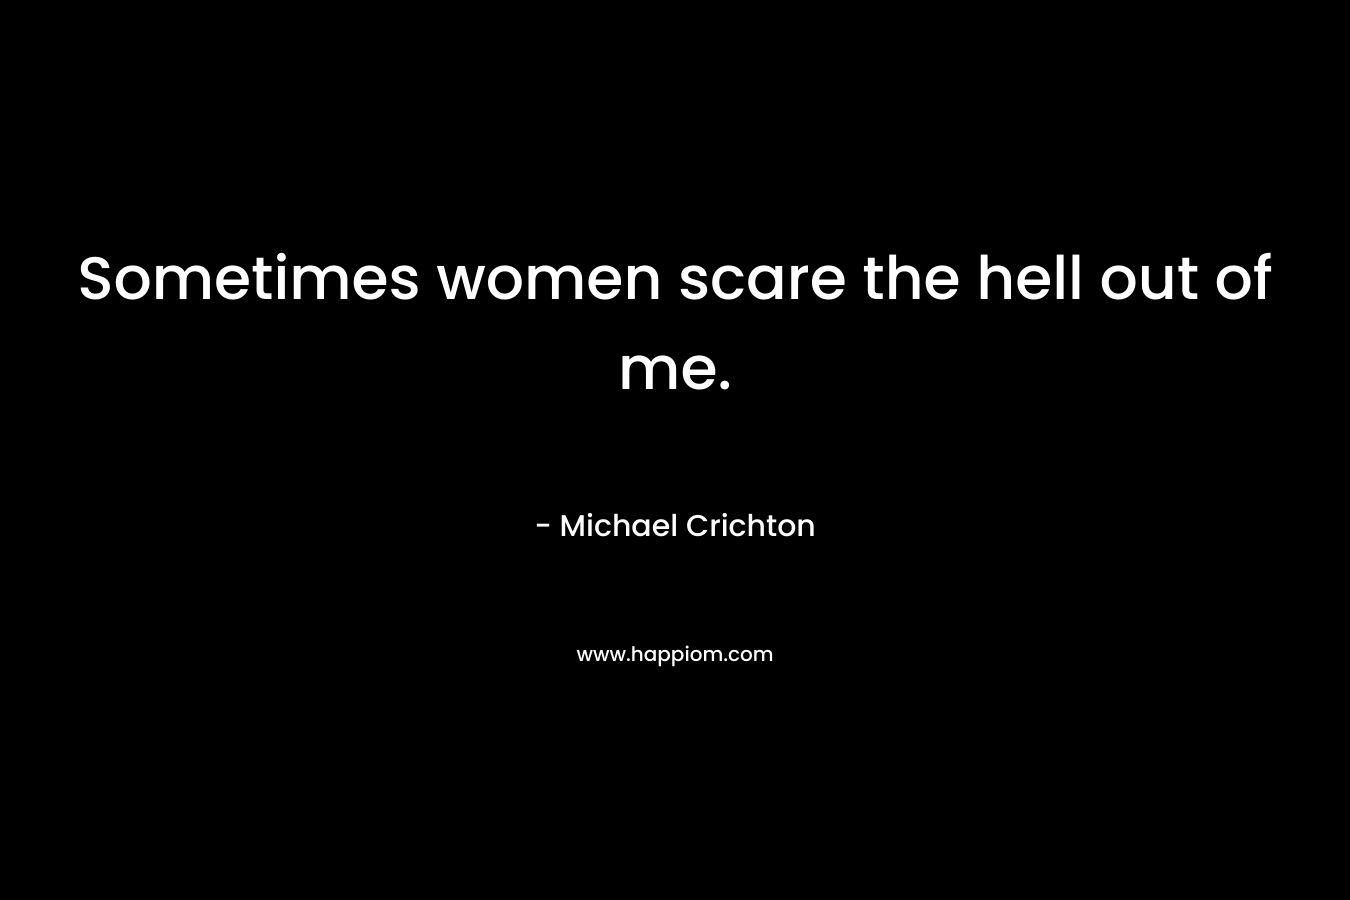 Sometimes women scare the hell out of me. – Michael Crichton